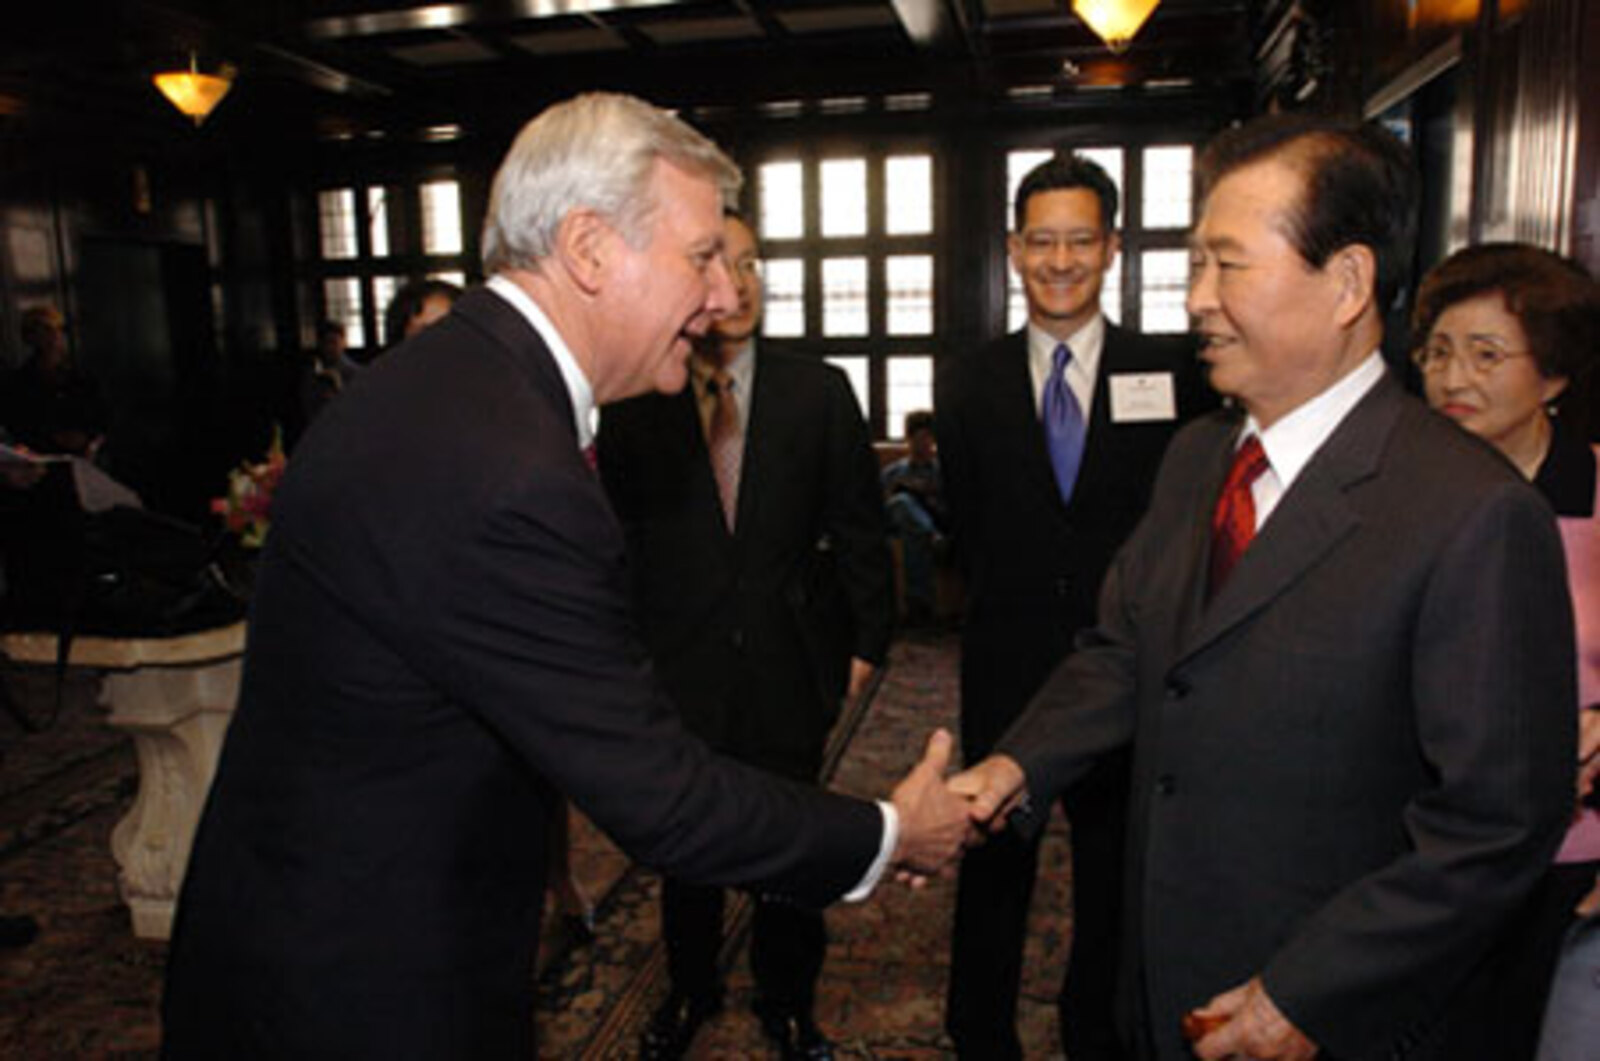  The Asia Foundation and Doug Bereuter host former Republic of Korea President and Nobel Peace Prize winner Kim Dae-jung in San Francisco, April 25, 2005.